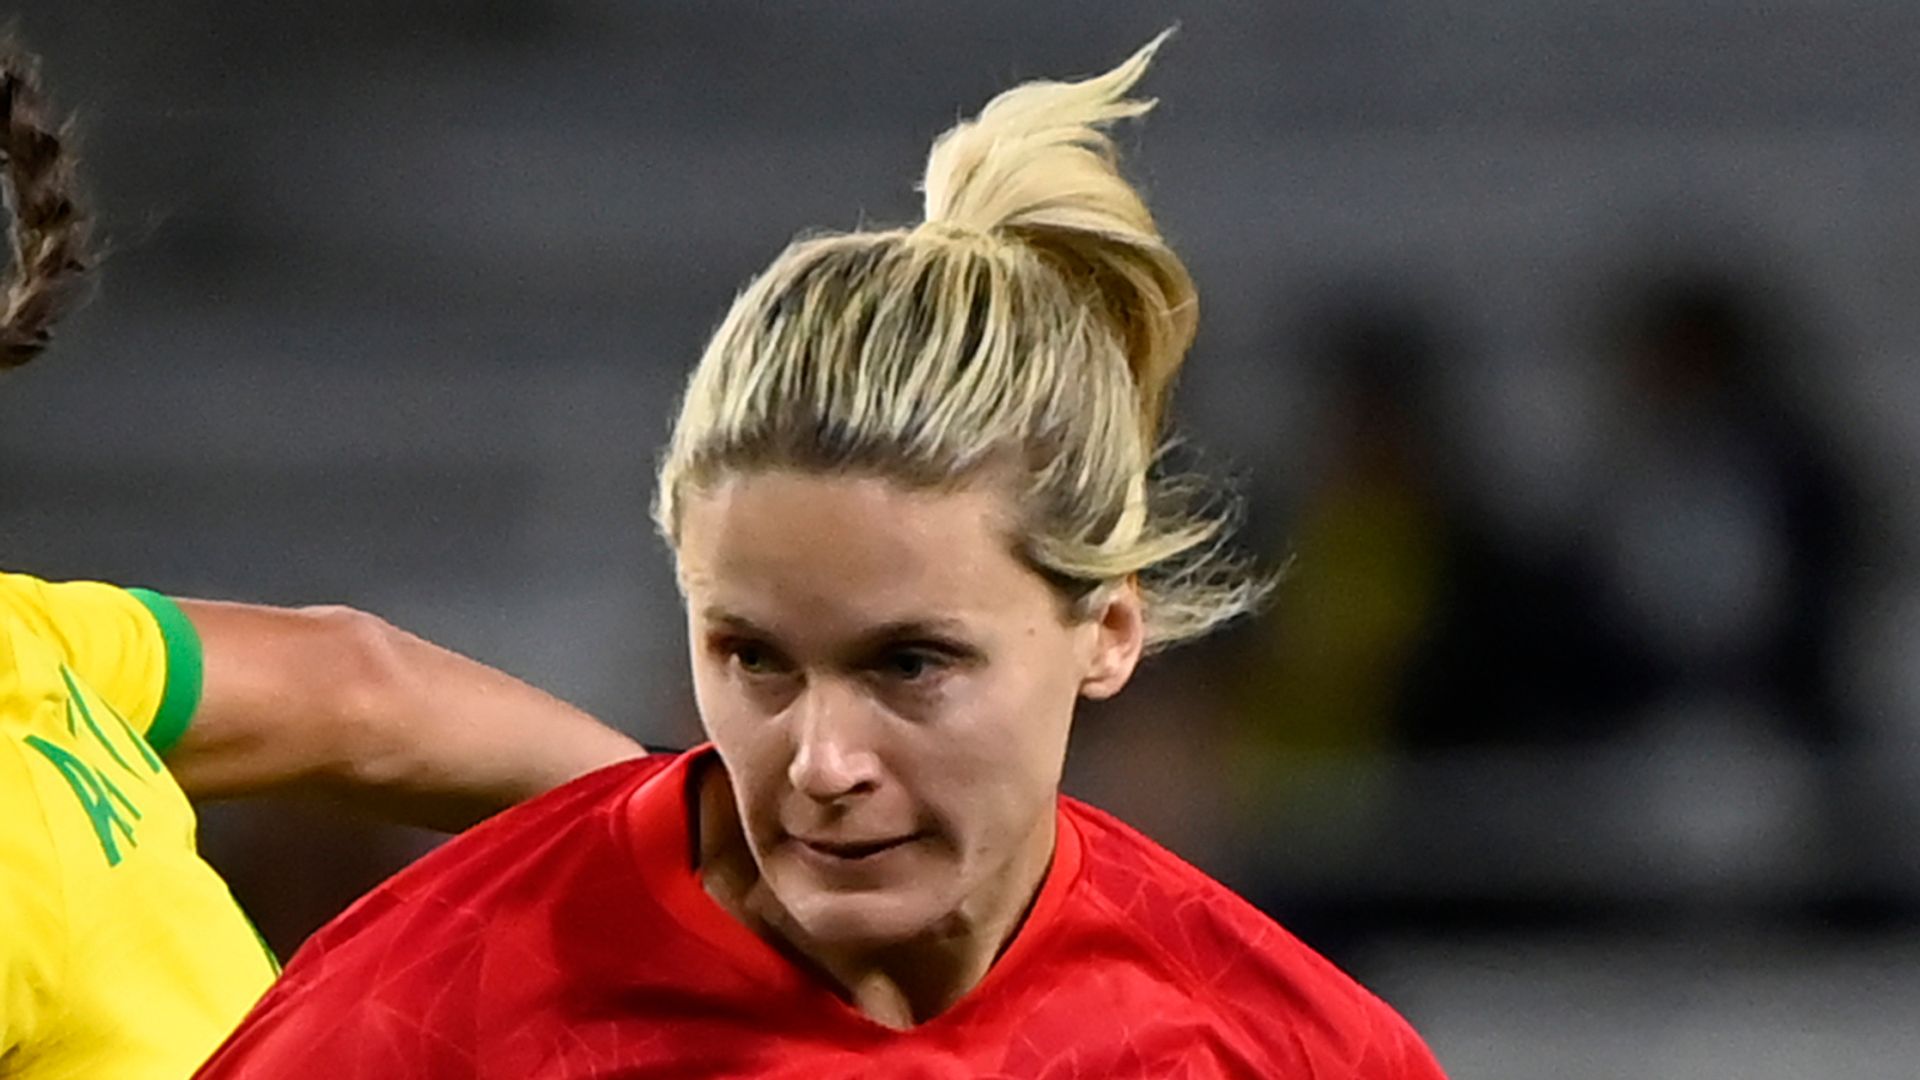 Arsenal Women sign Canada forward Lacasse from Benfica